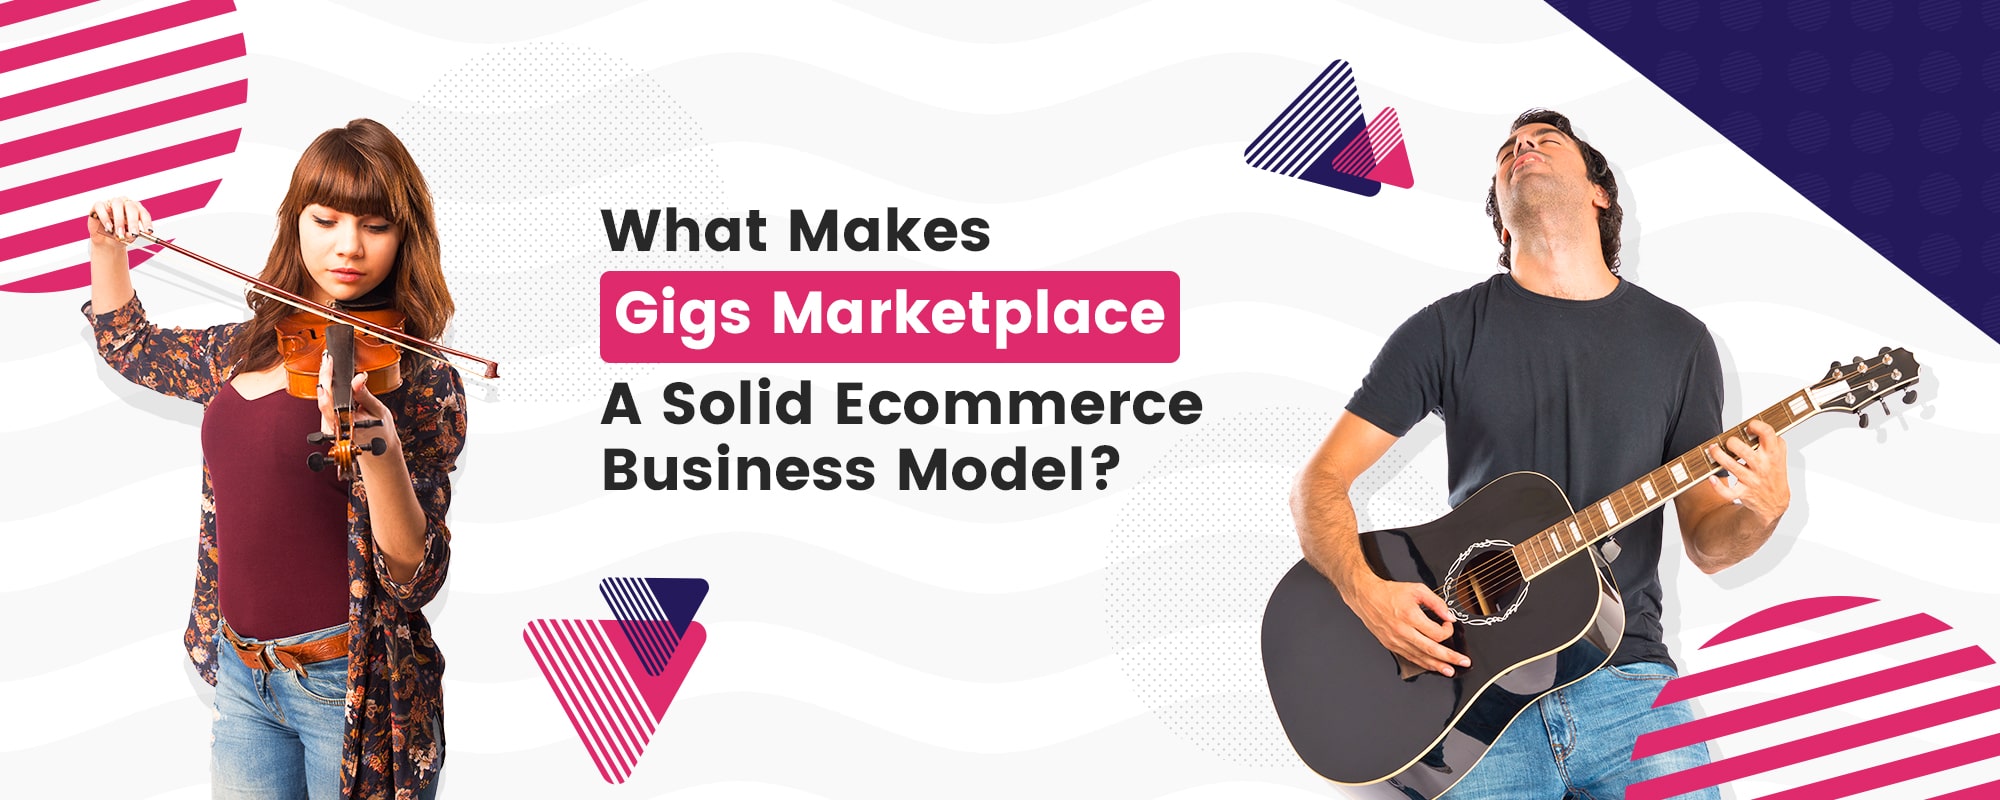 What Makes Gigs Marketplace a Solid Ecommerce Business Model?